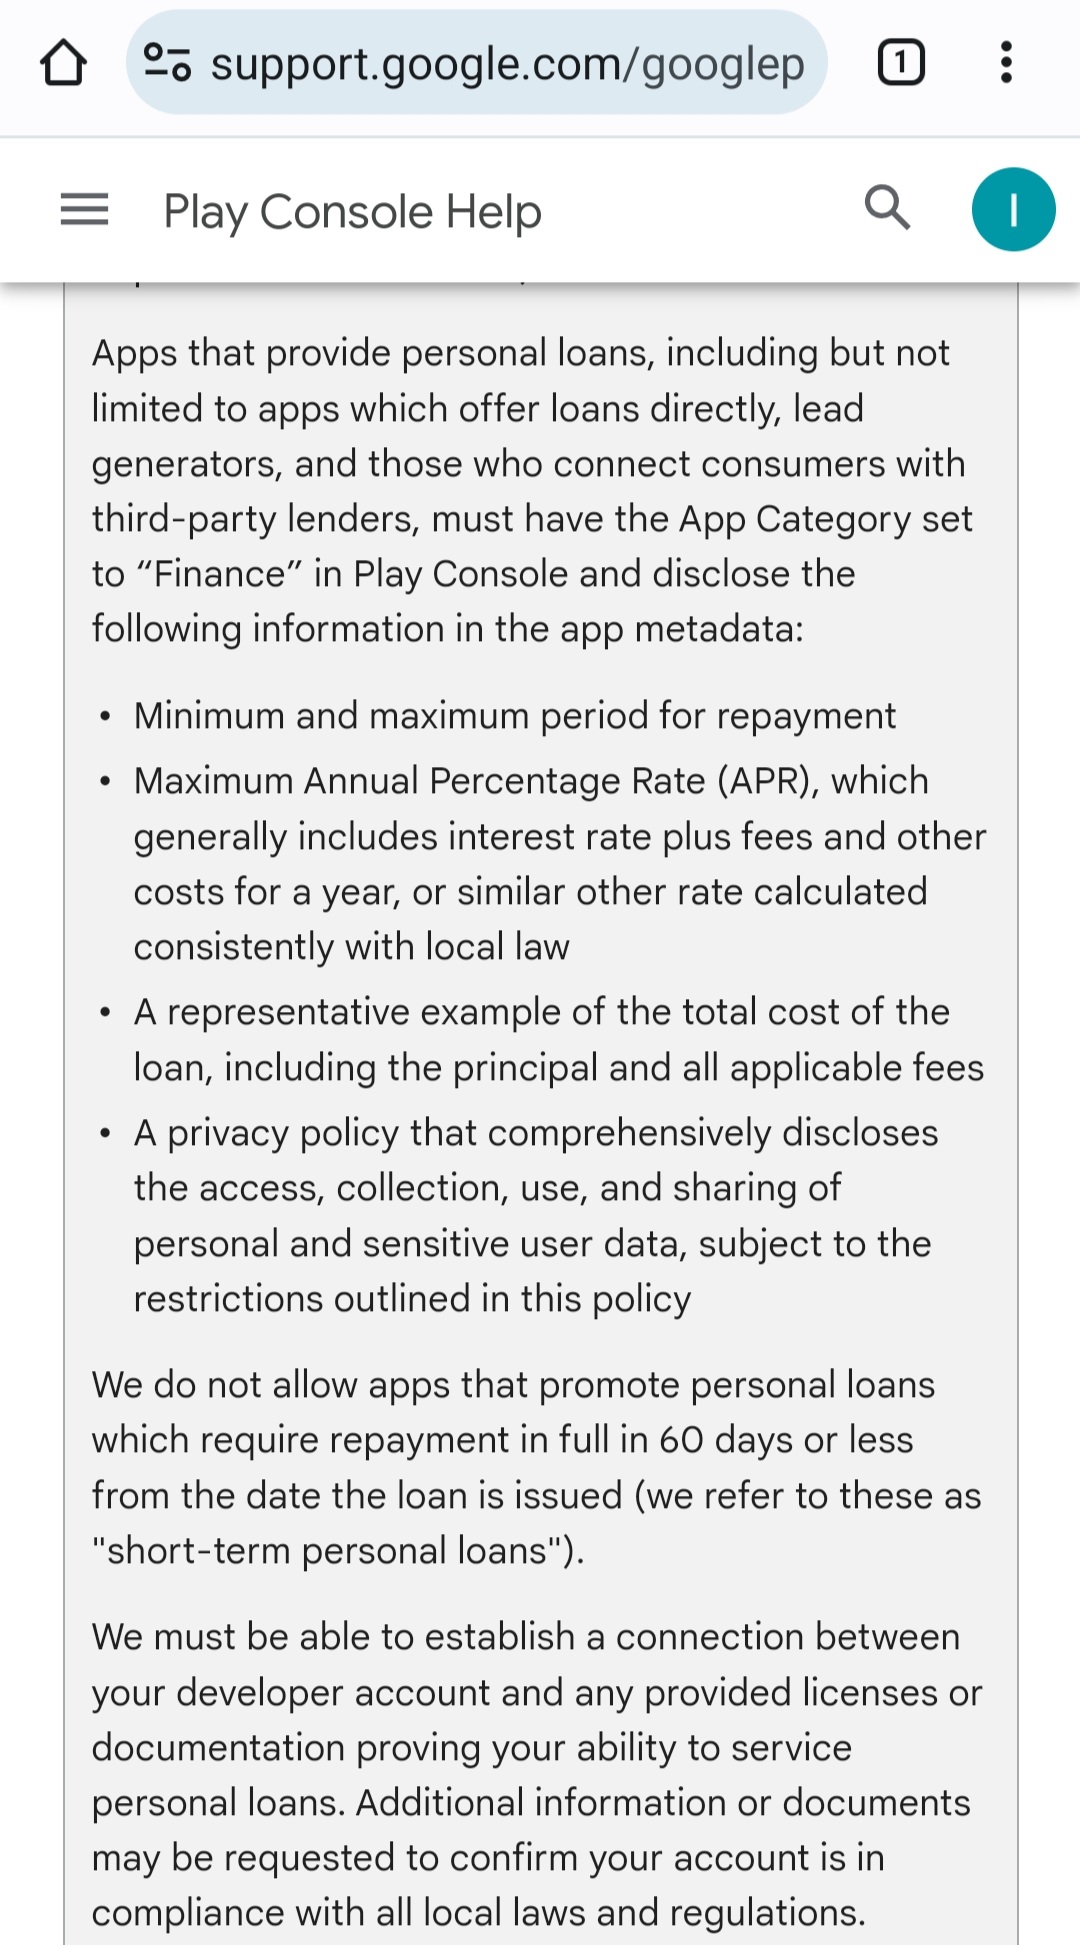 Google Play Console Rule Or Policy